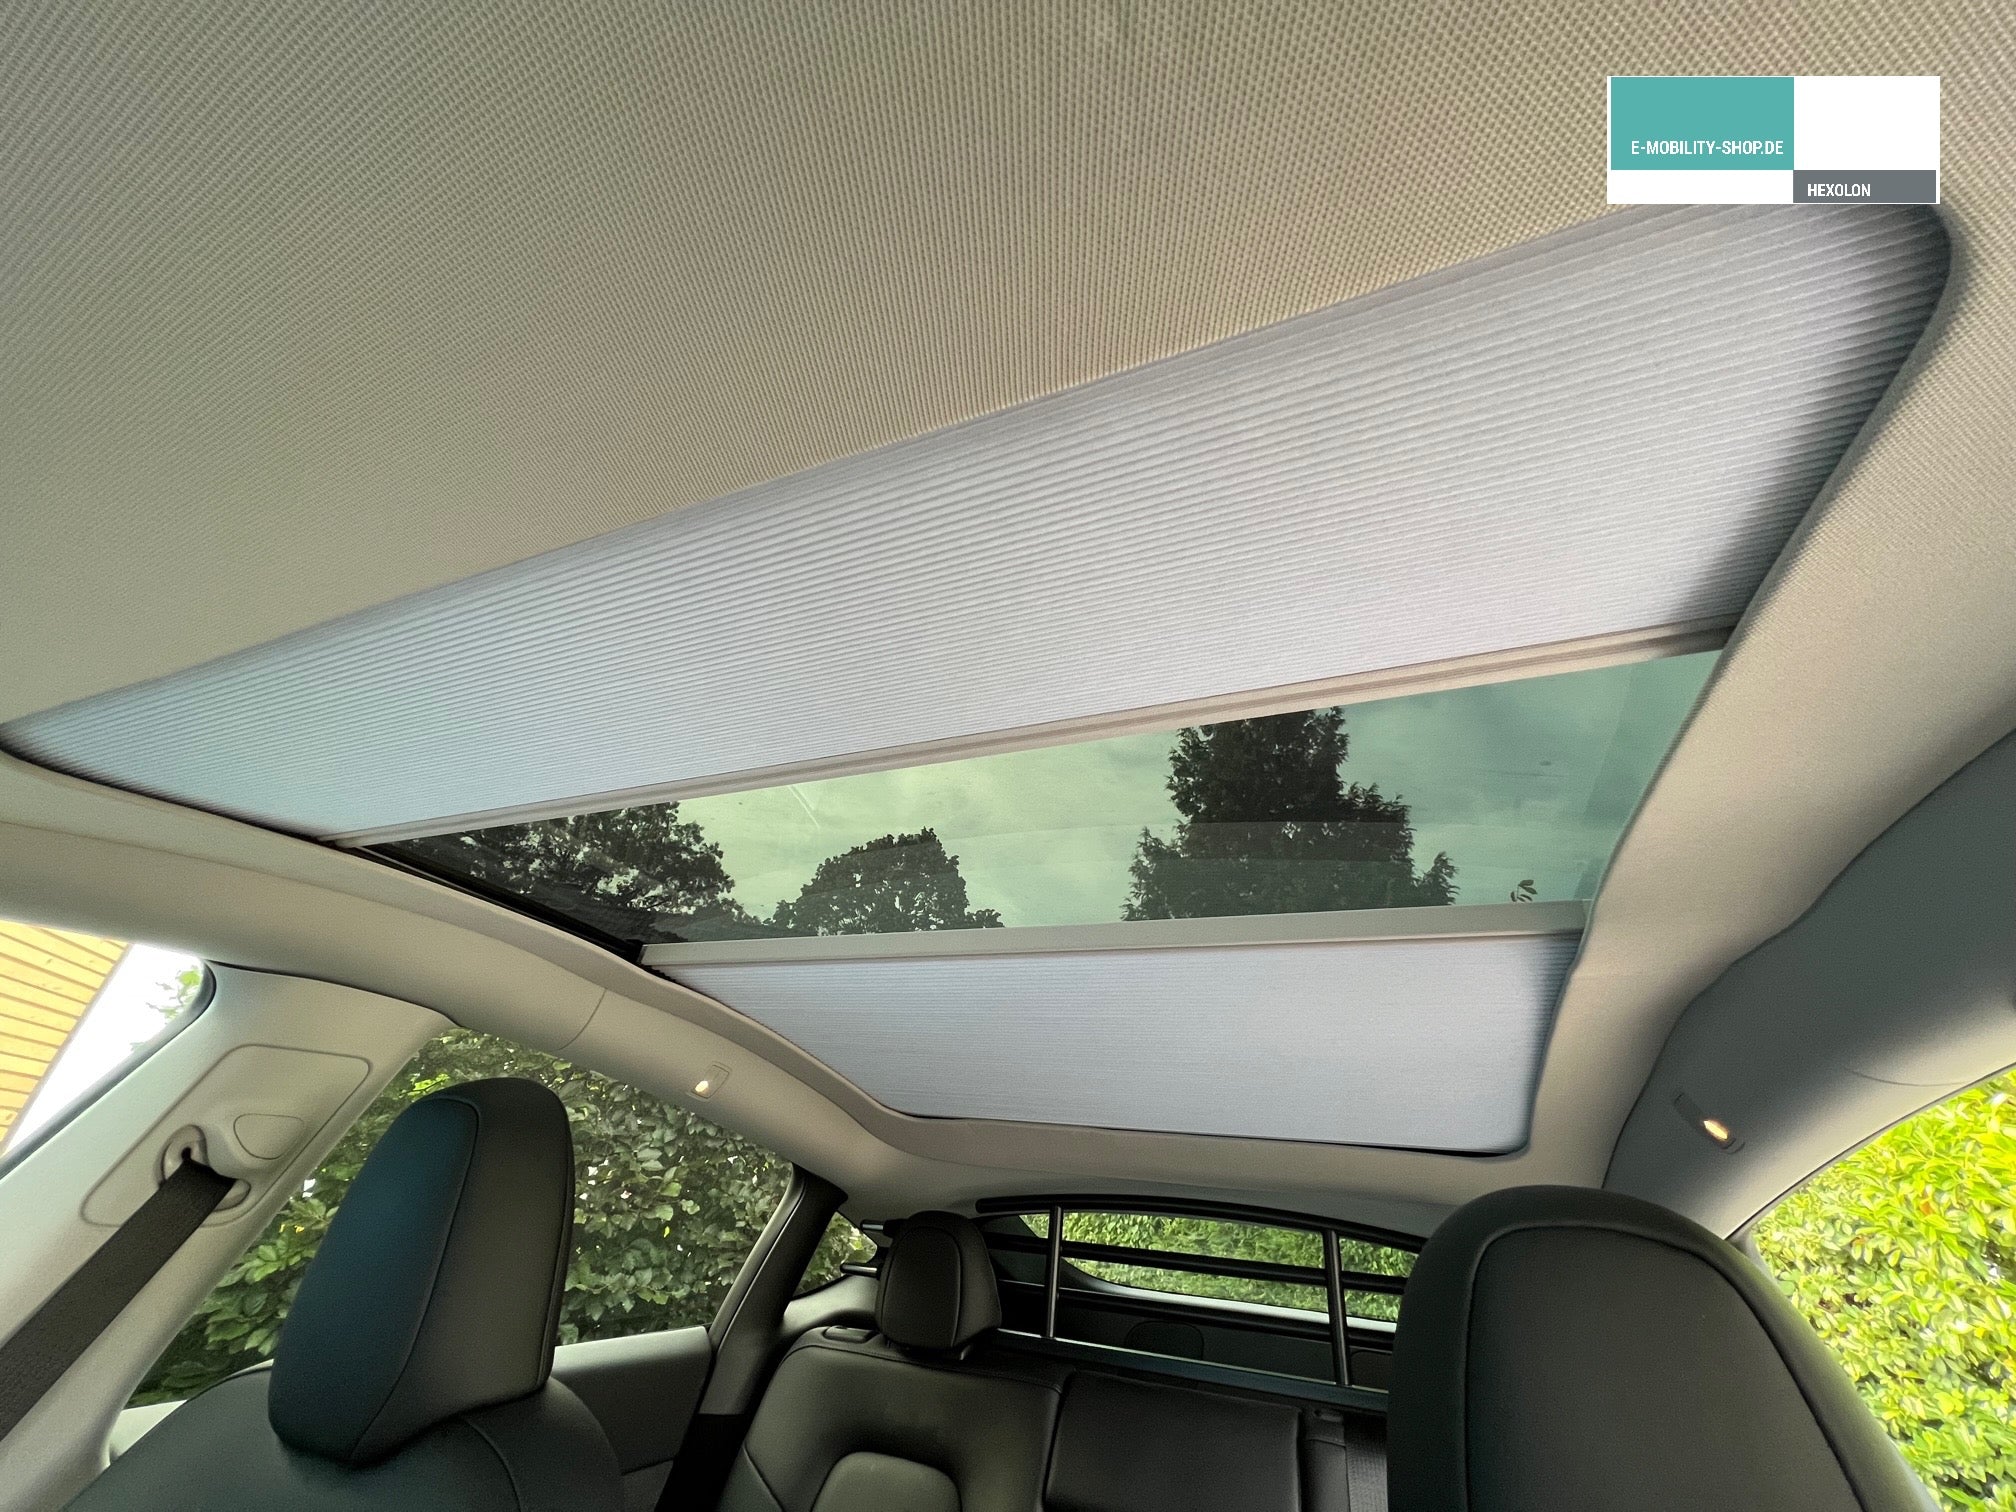 Sun protection pleated blind Tesla Model Y – E-Mobility Shop